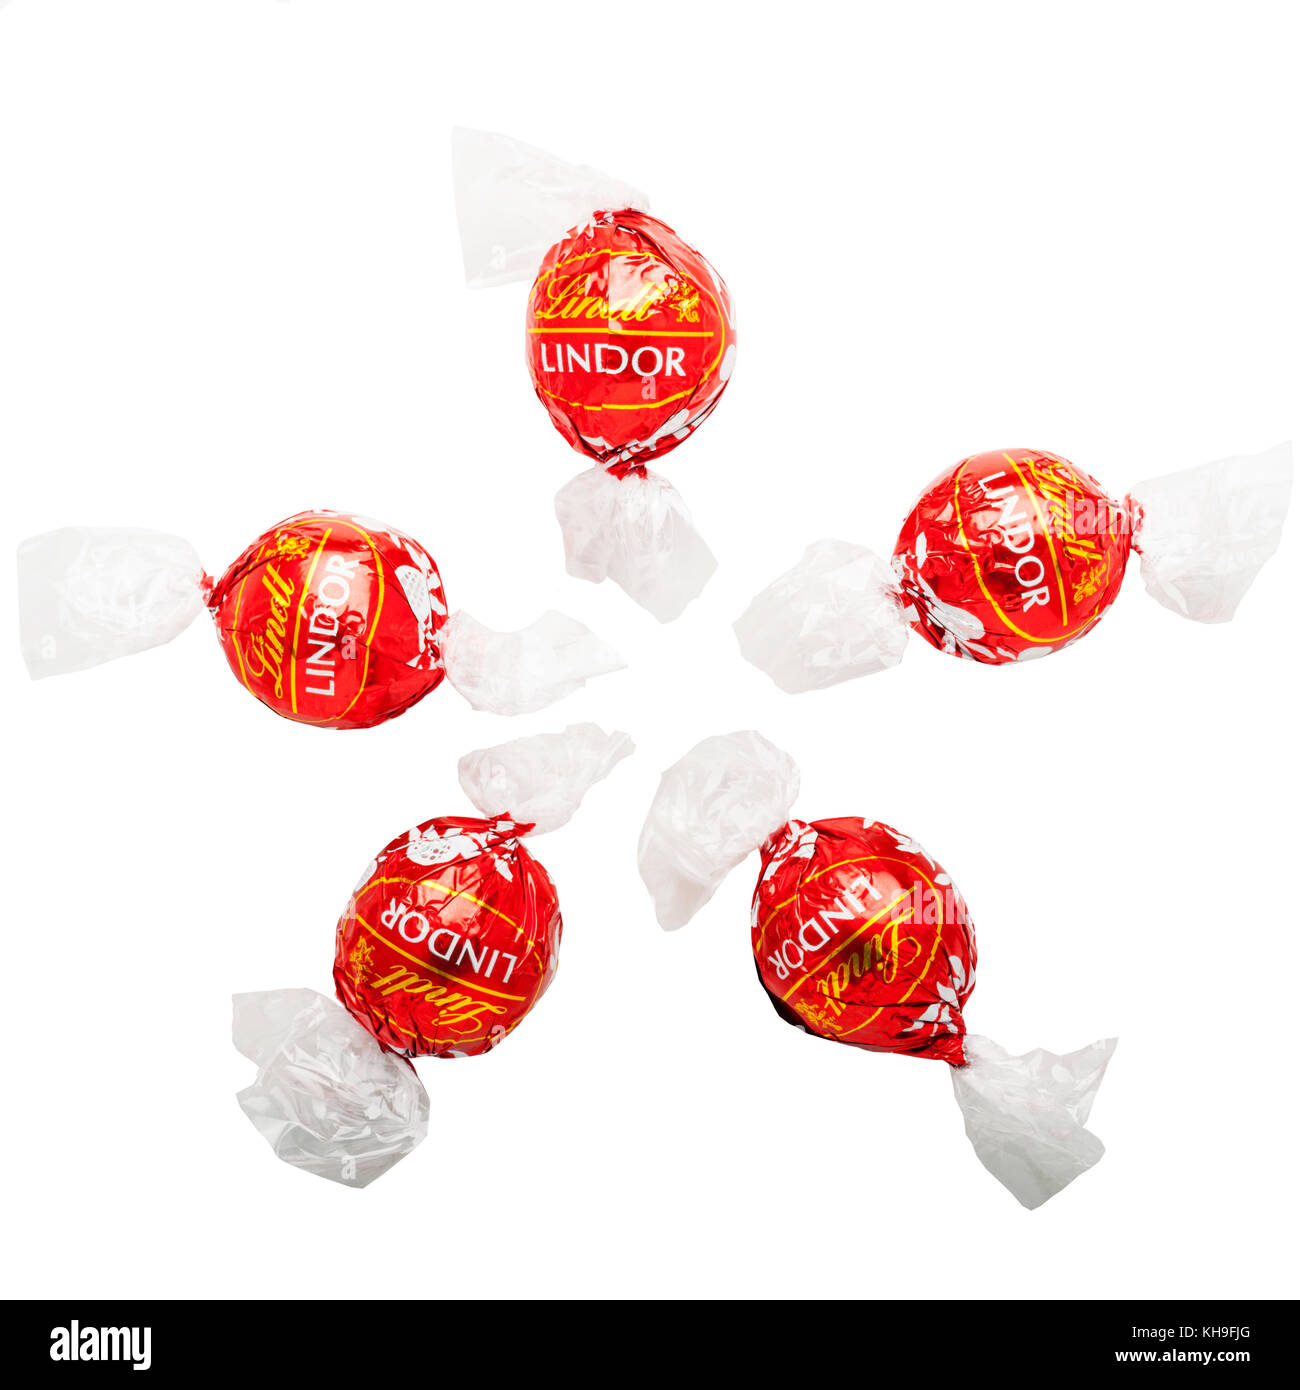 Some Lindt Lindor chocolates on a white background Stock Photo